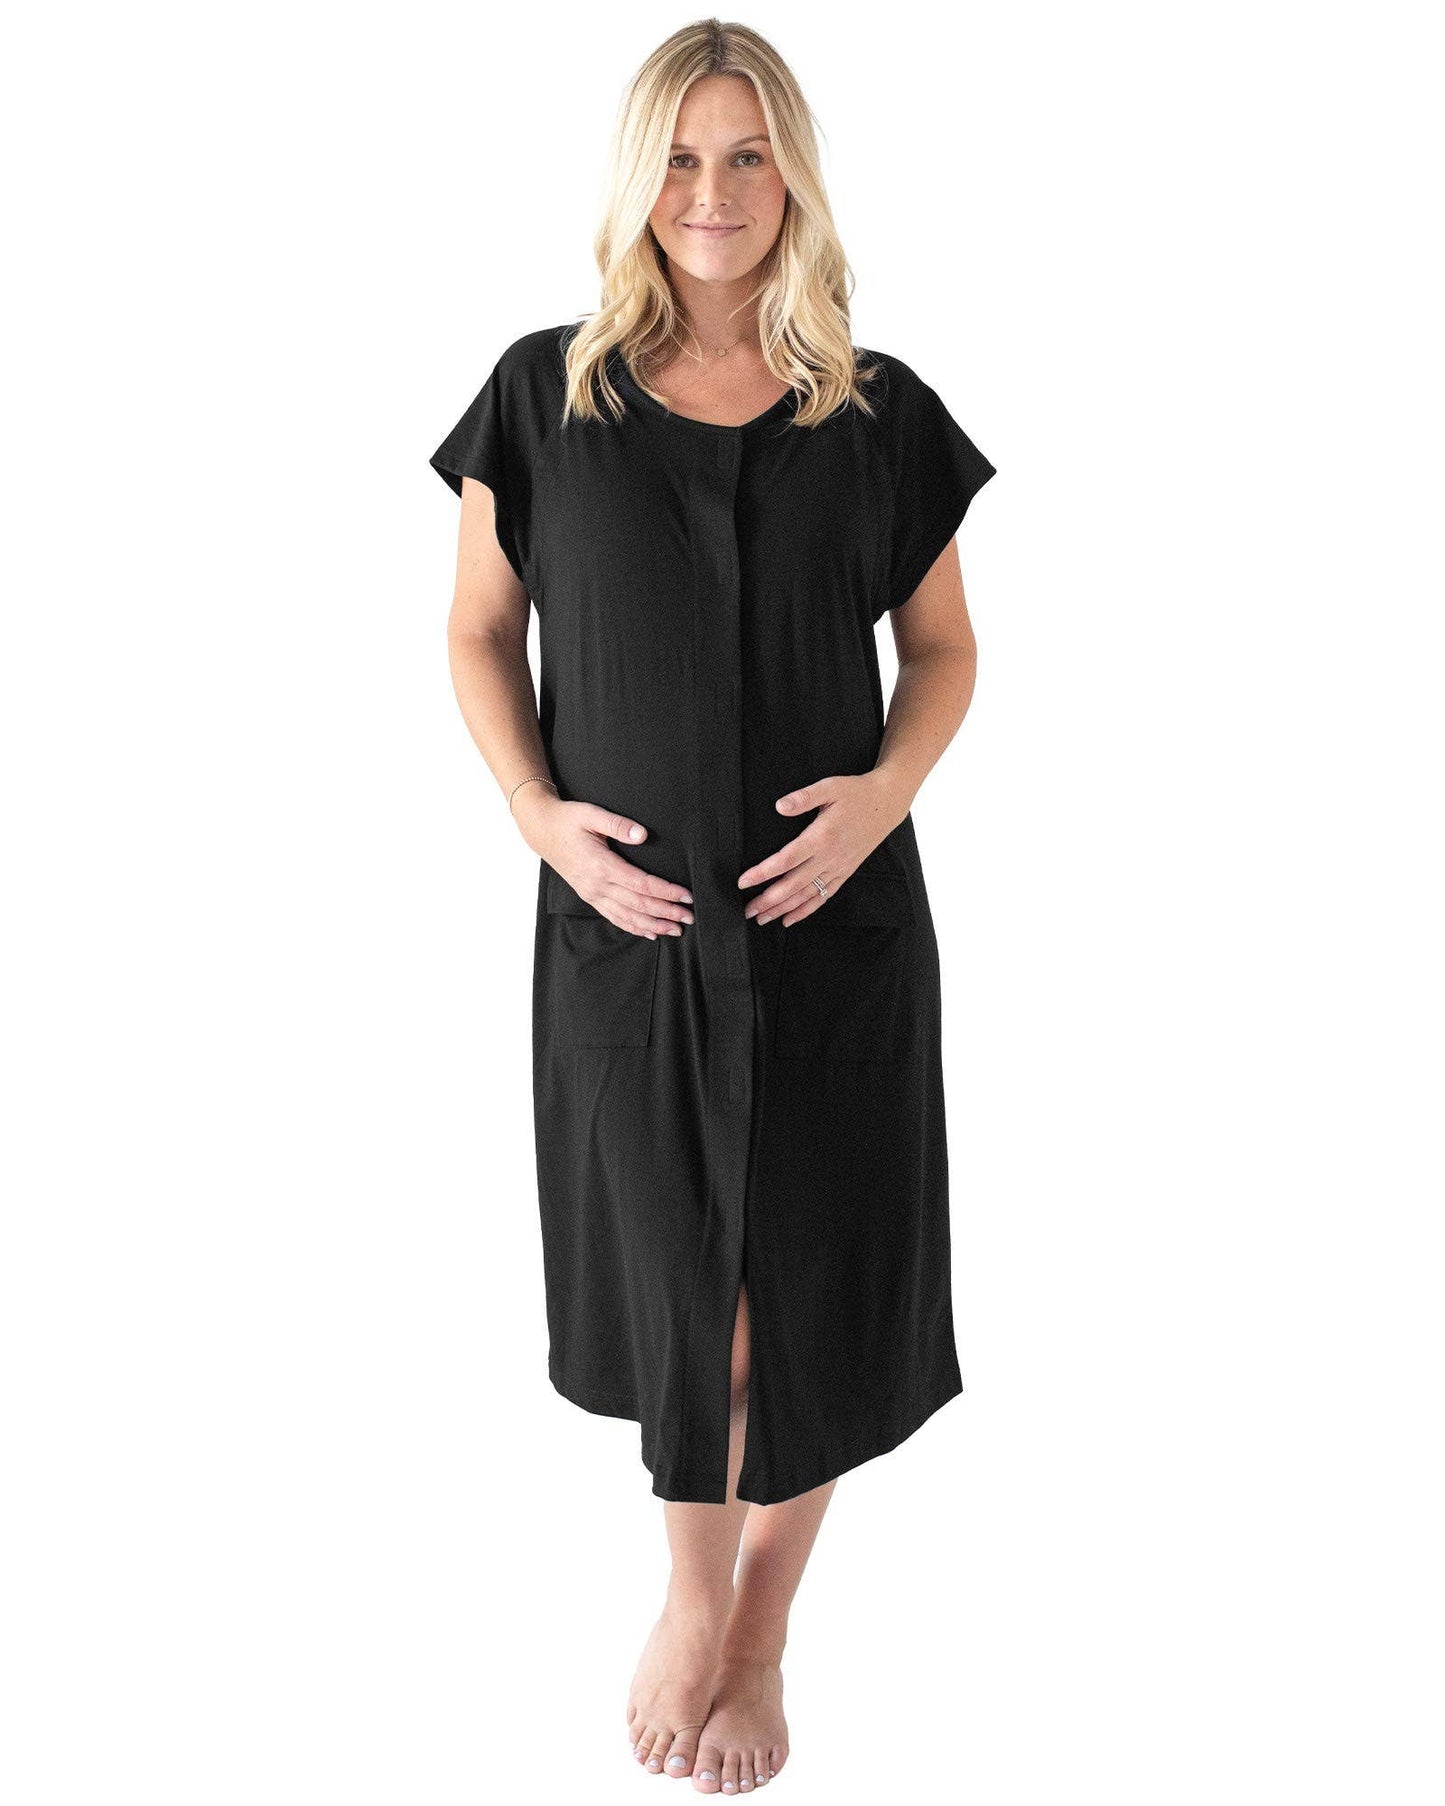 Universal Labor & Delivery Gown | Grey Heather